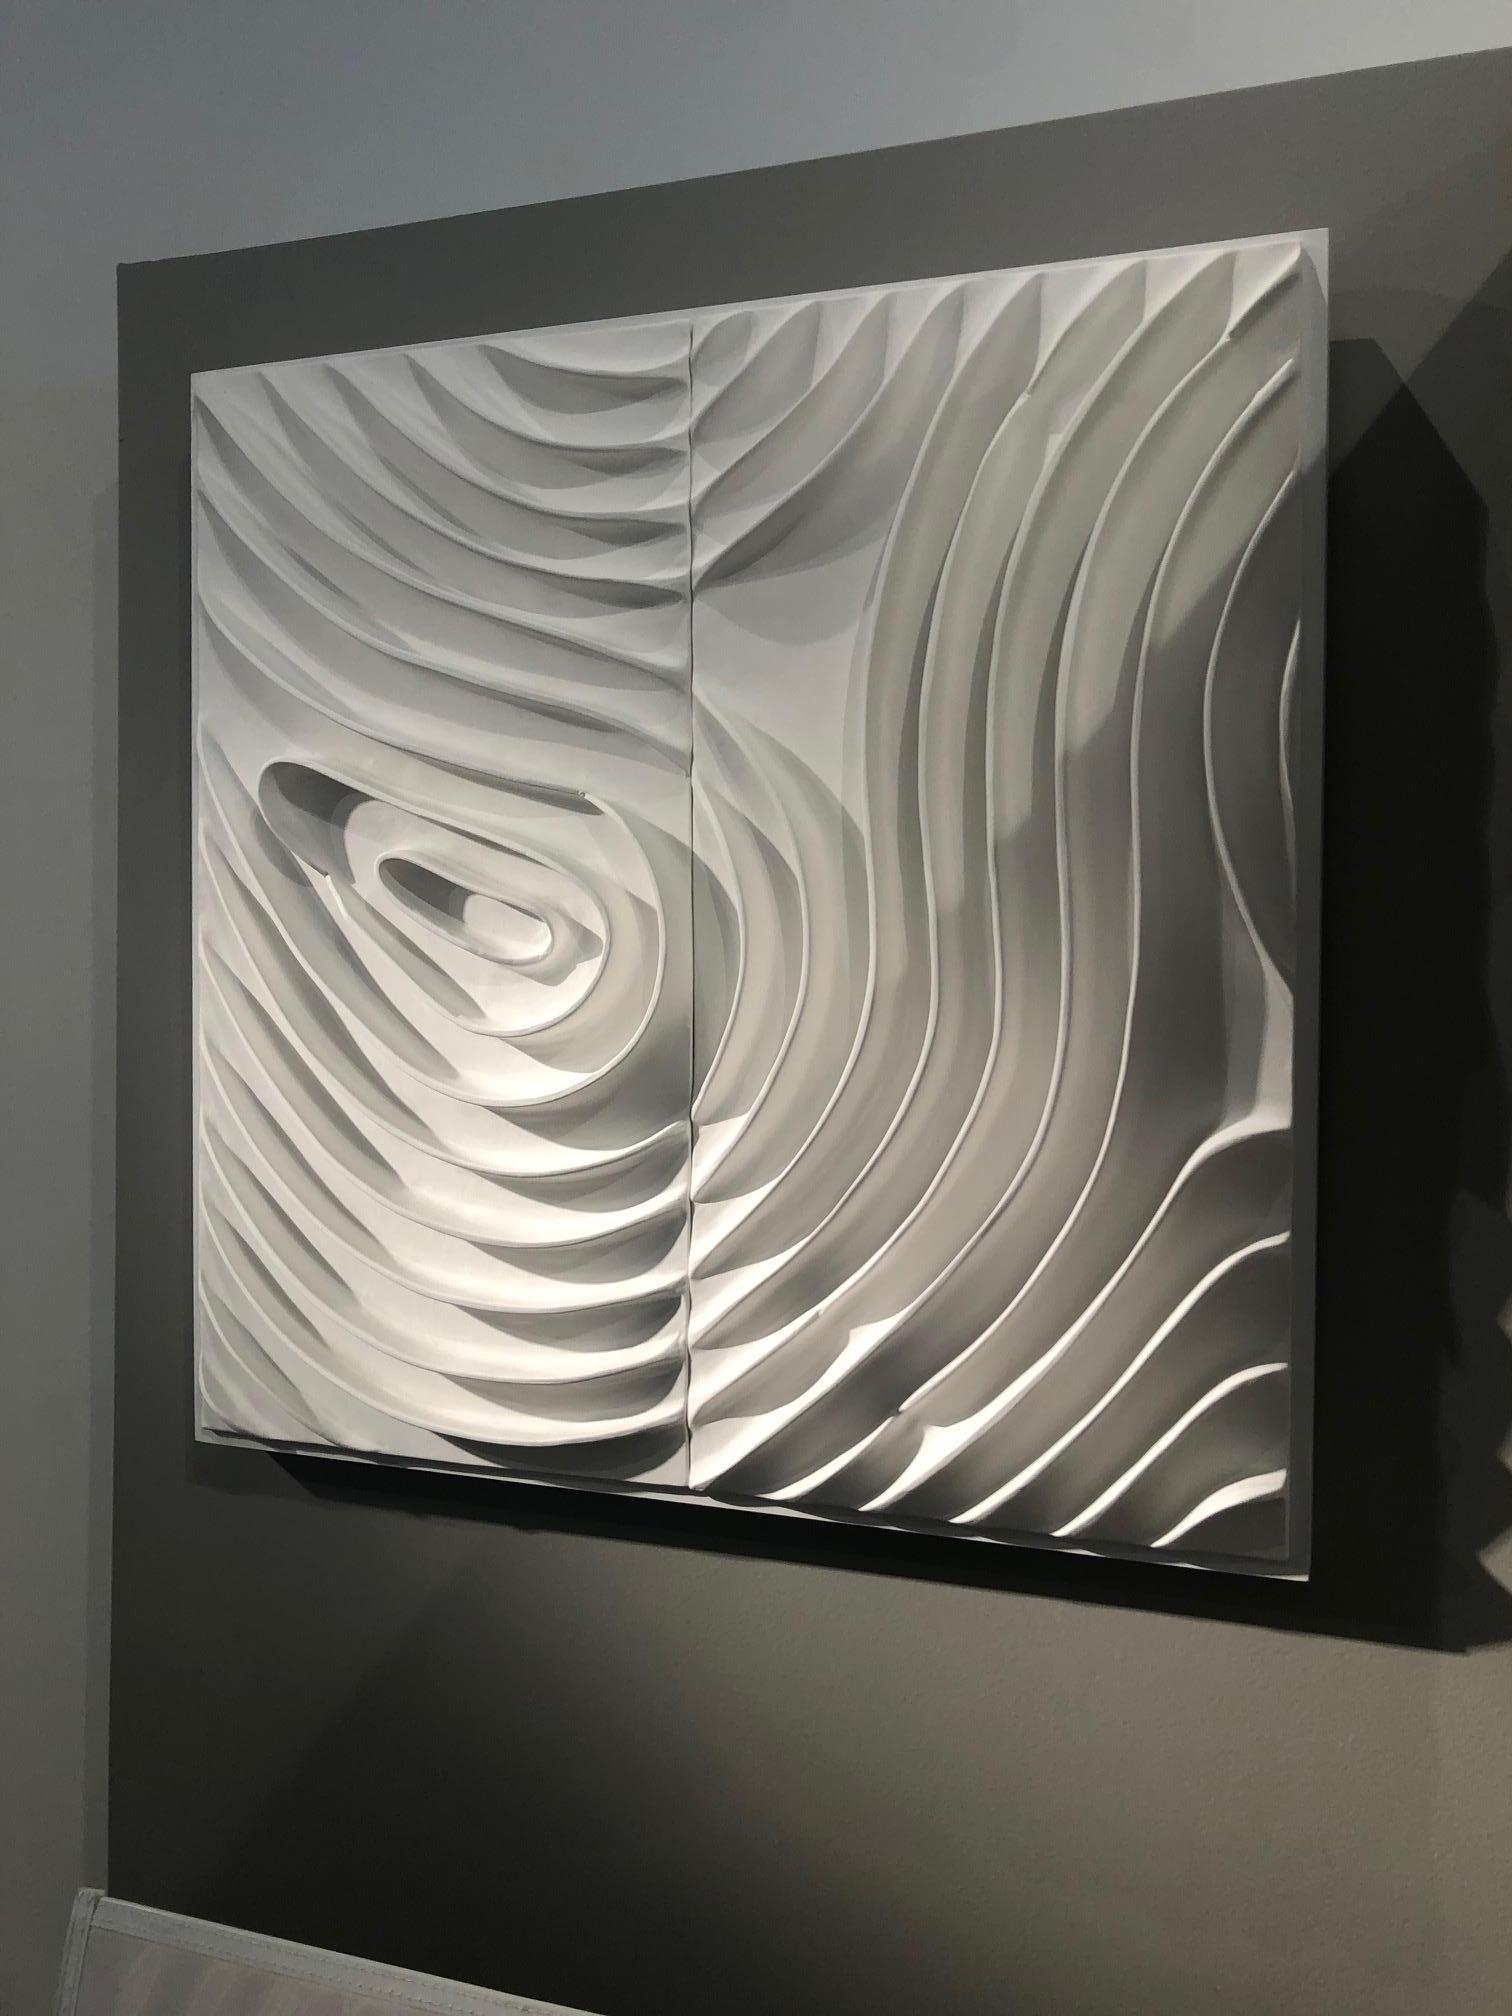 Original abstract ceramic sculptural wall mounted work. The unique piece of art is created with matte white ceramic that is mounted to a white wood panel, and it hangs traditionally like a painting, with wire on the back. A beautiful, minimal work